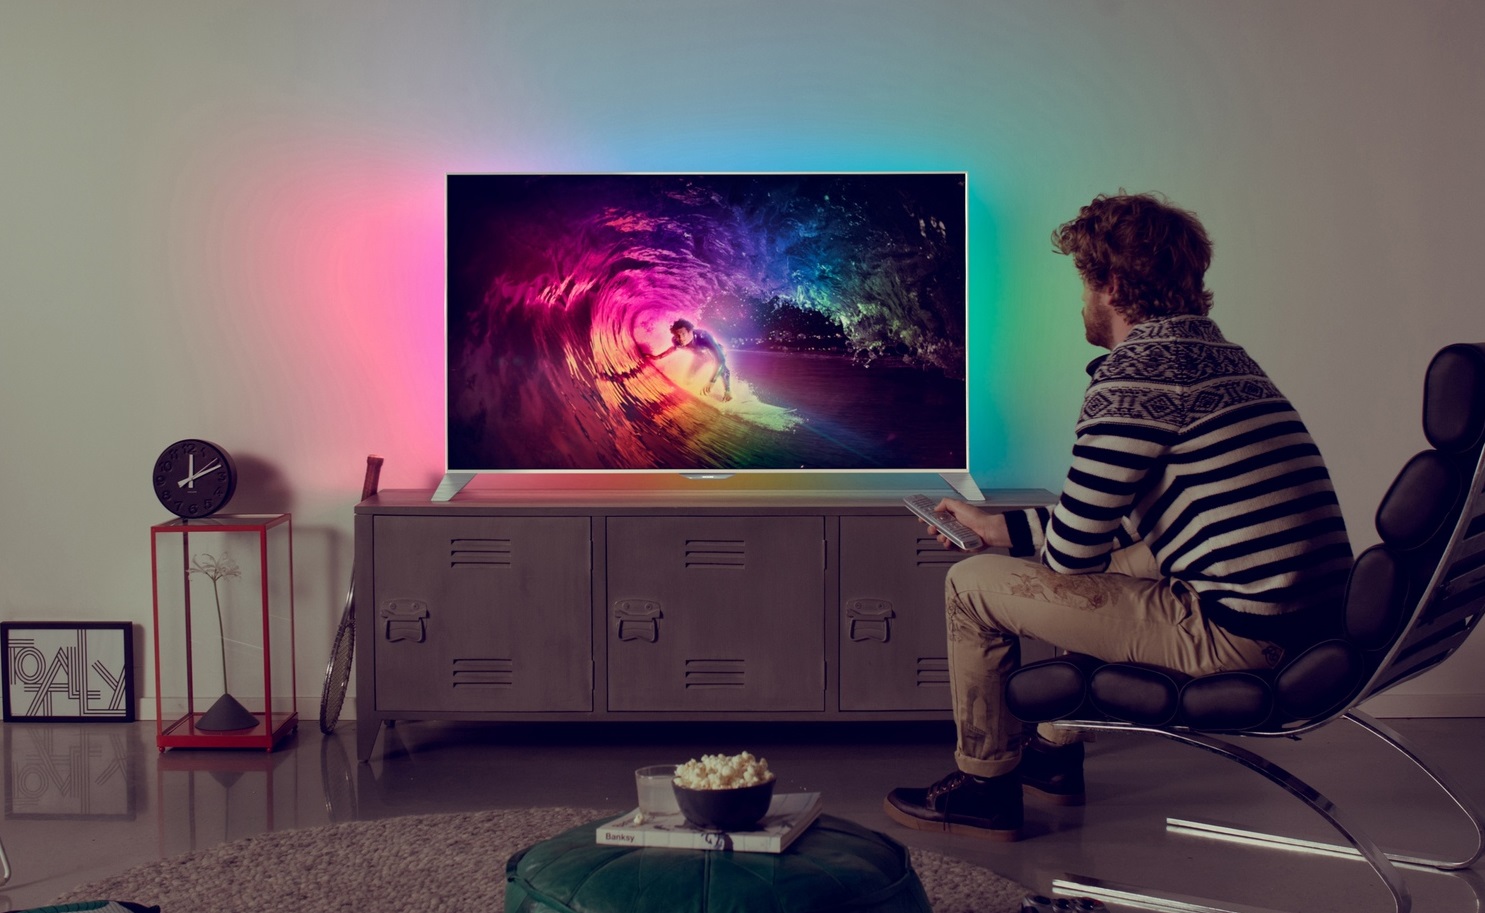 Ranking the best smart TVs for 2022